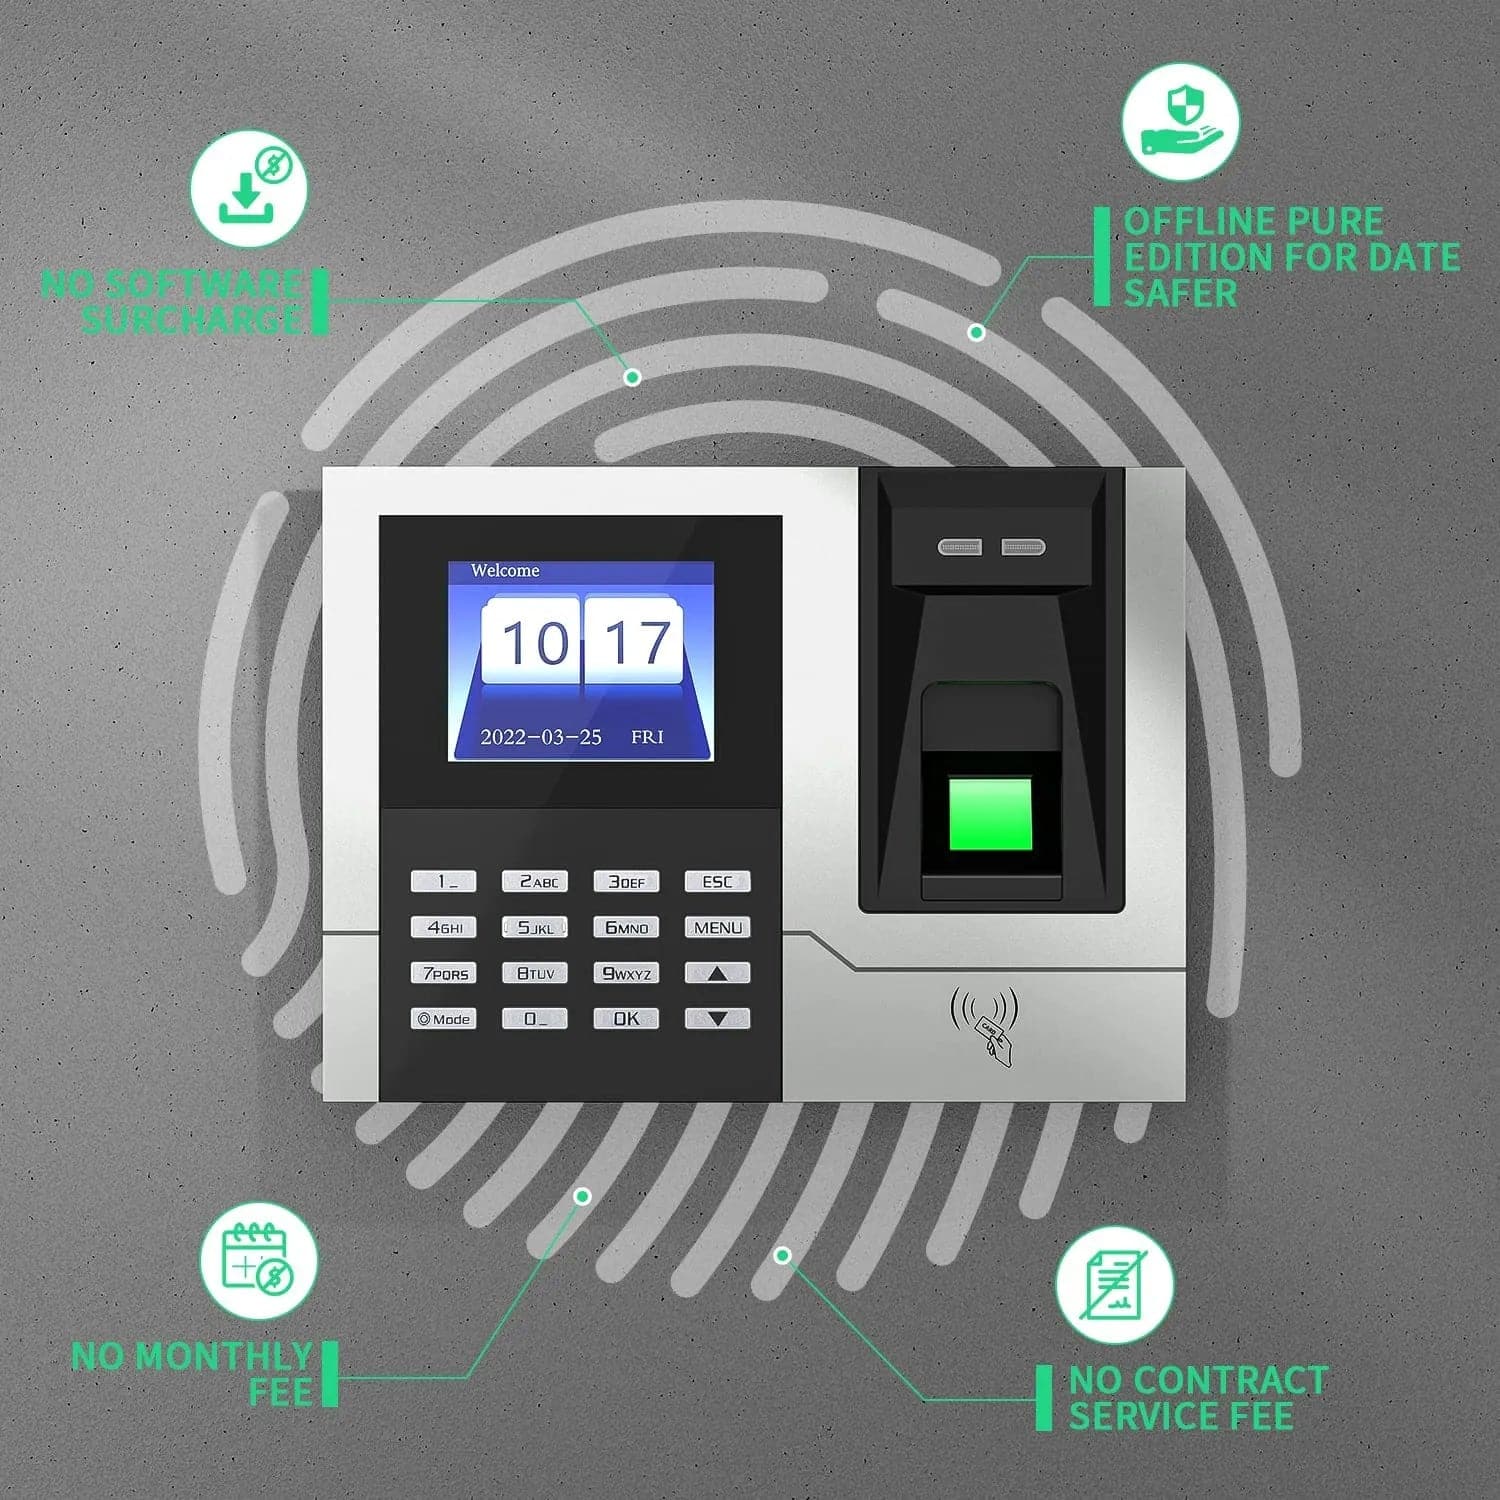 Finger Scan, RFID, and PIN Punching in One Intelligent Time Card Machine IAM03 SVANTTO. No monthly fee, no software surcharge, offline pure edition for date safer, no contract service fee. a high-performance ARM processor, which automatically calculates attendance data without using any APP, and exports attendance report with one click through the USB flash drive. No need to spend time manually calculating hours, employees’ hours are automatically accumulated.